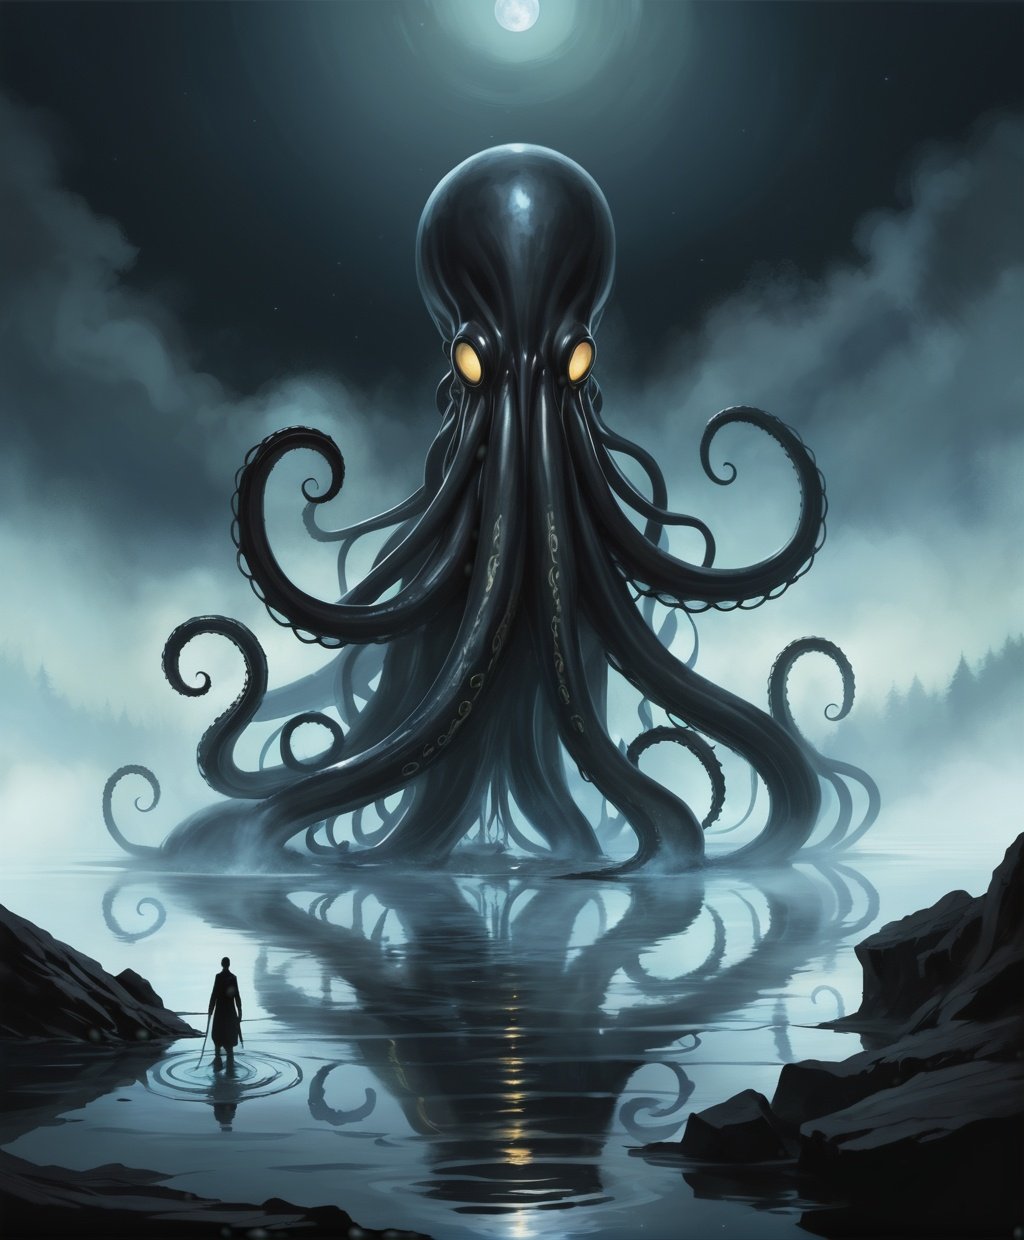 digital painting, single long thin tentacle reaches out from an oily black lake, fog and moonlight, eldritch grimdark